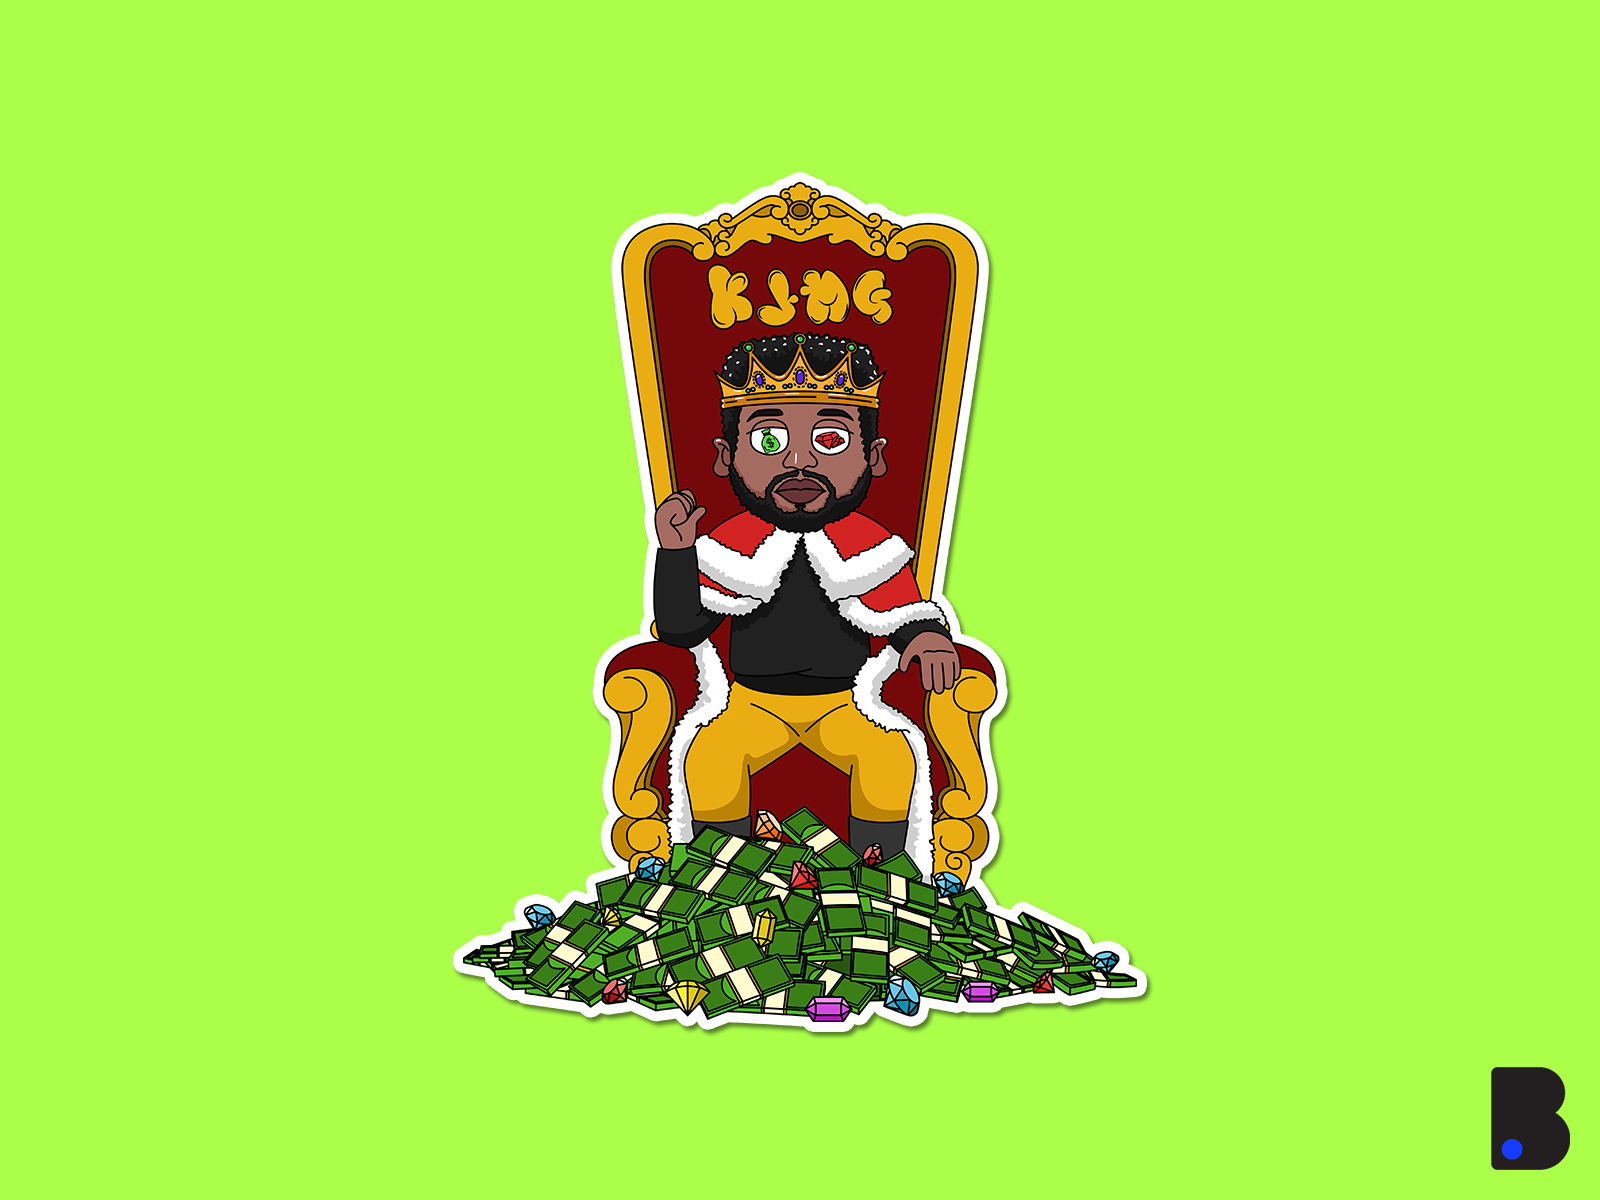 King Sitting on The Chair by Blueasarisandi on Dribbble